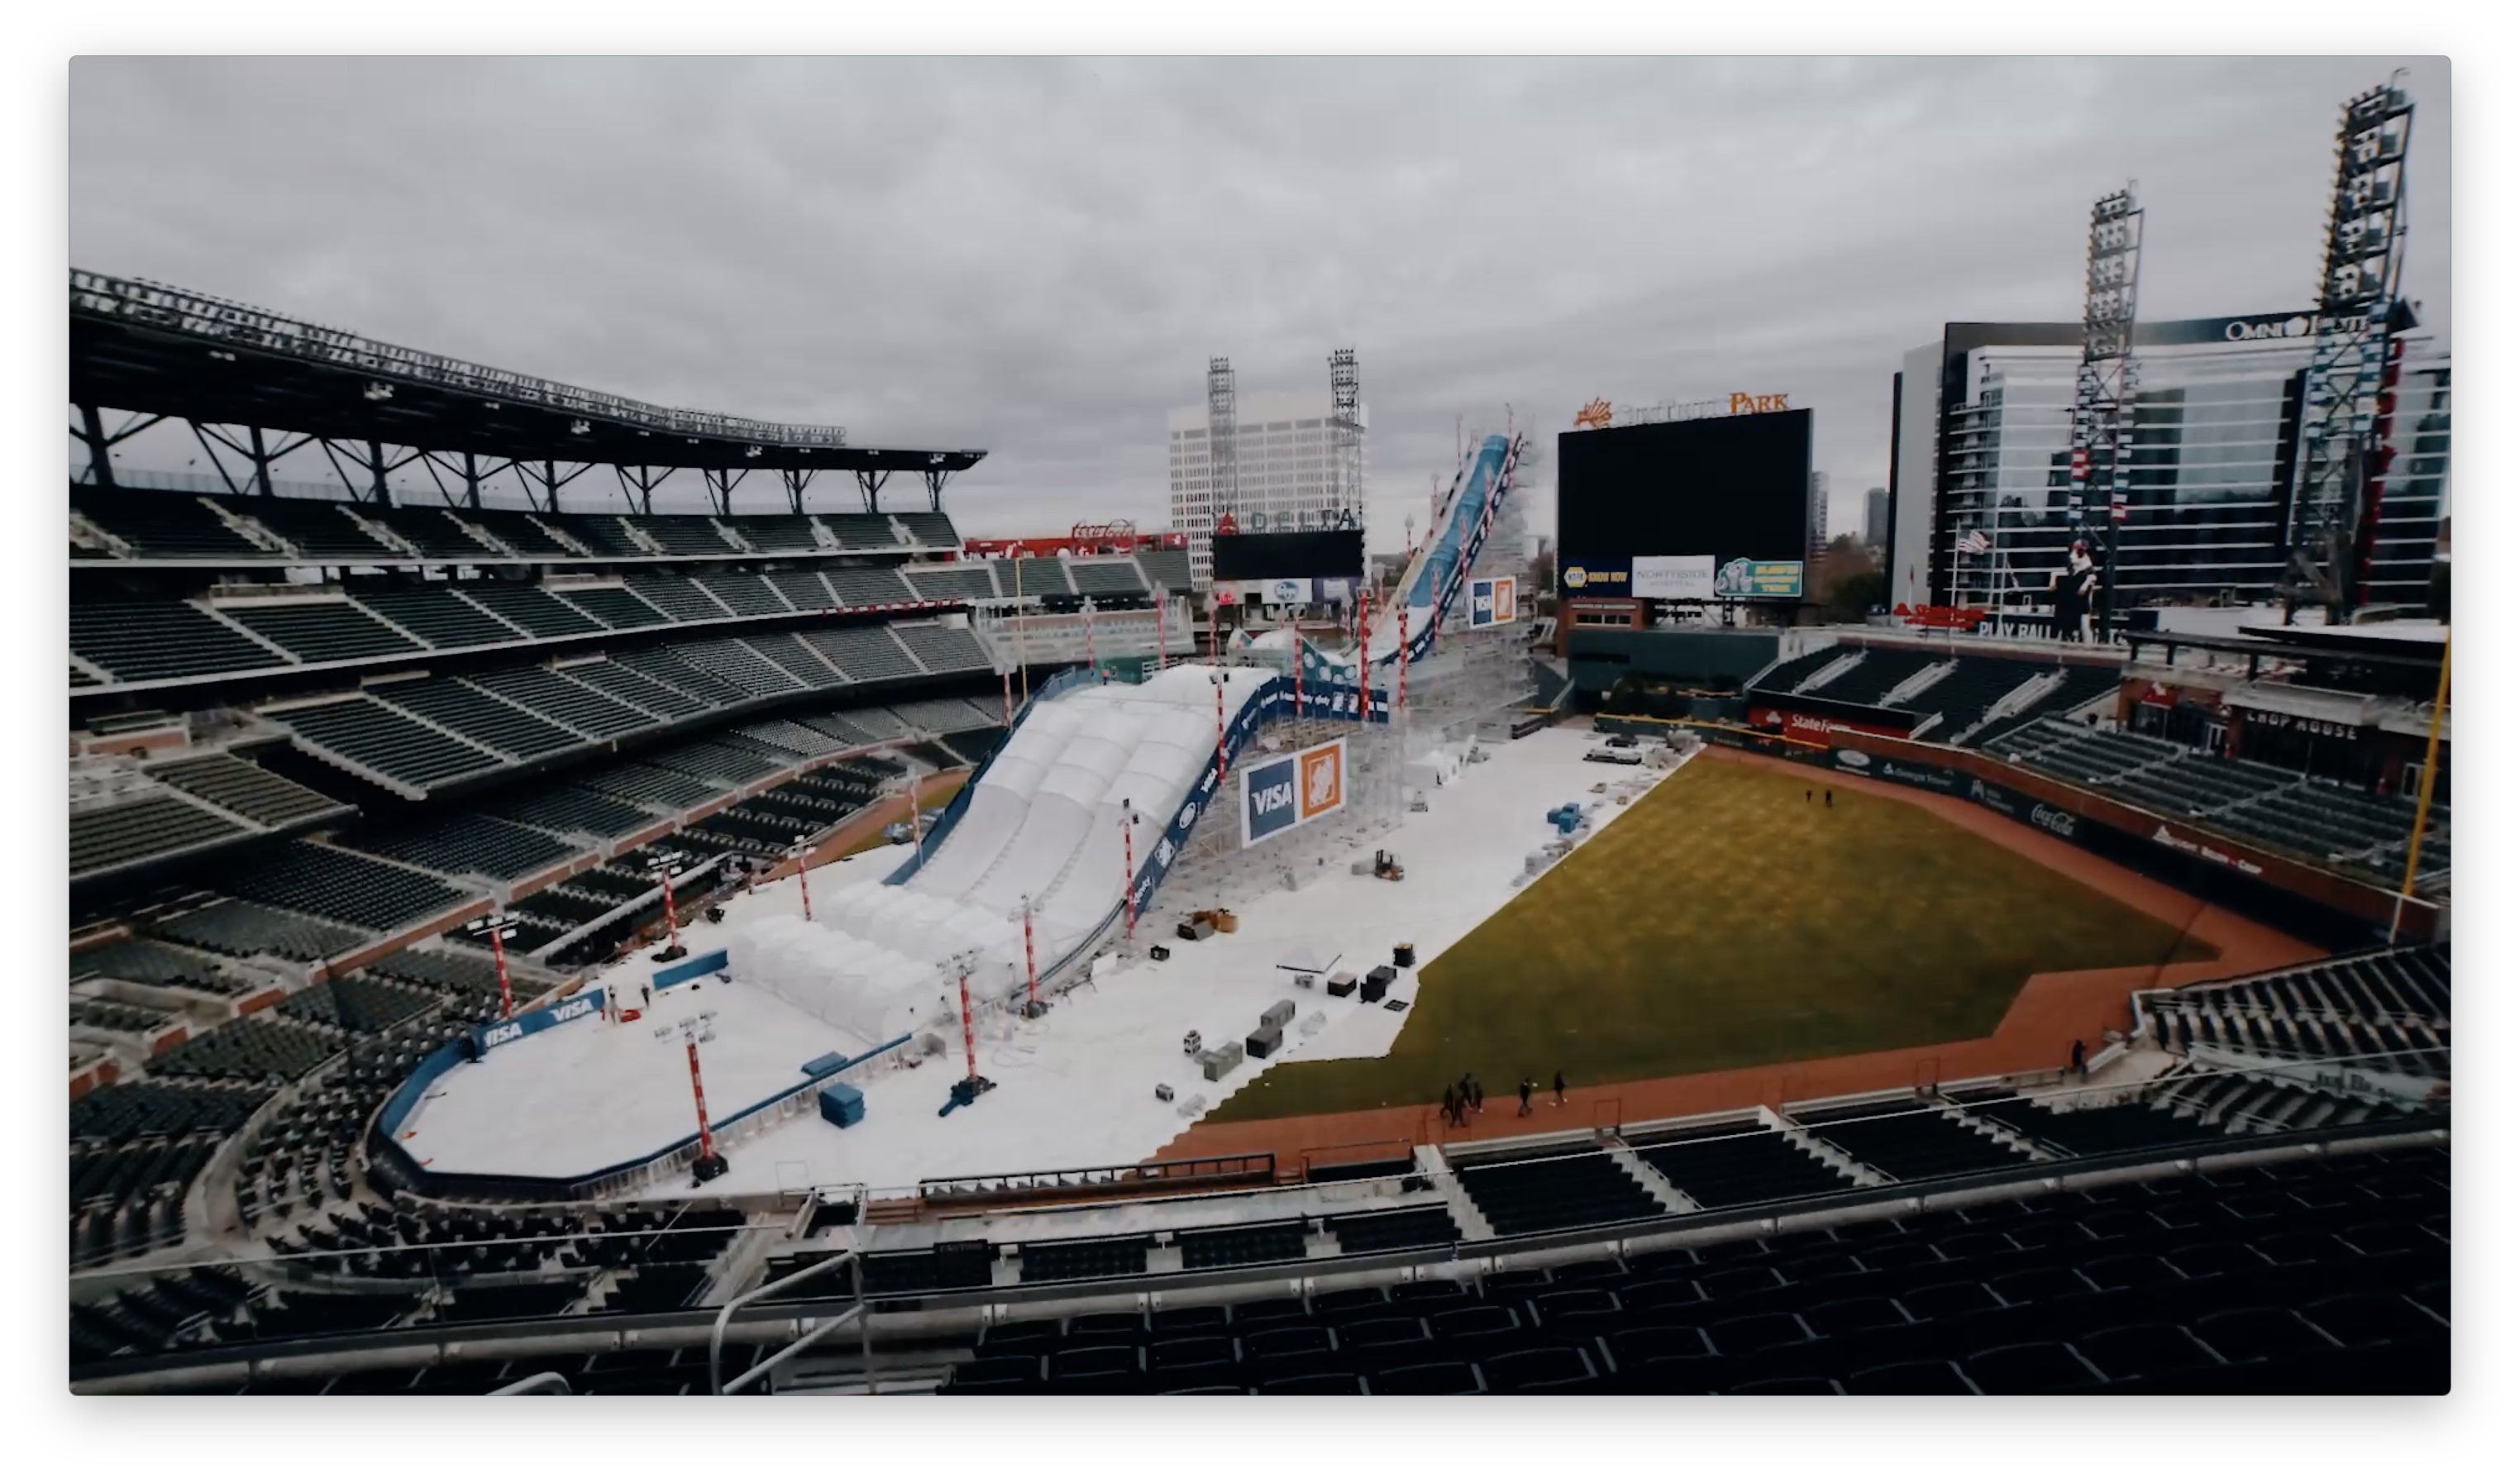 A massive white ramp being built in the middle of a baseball stadium.